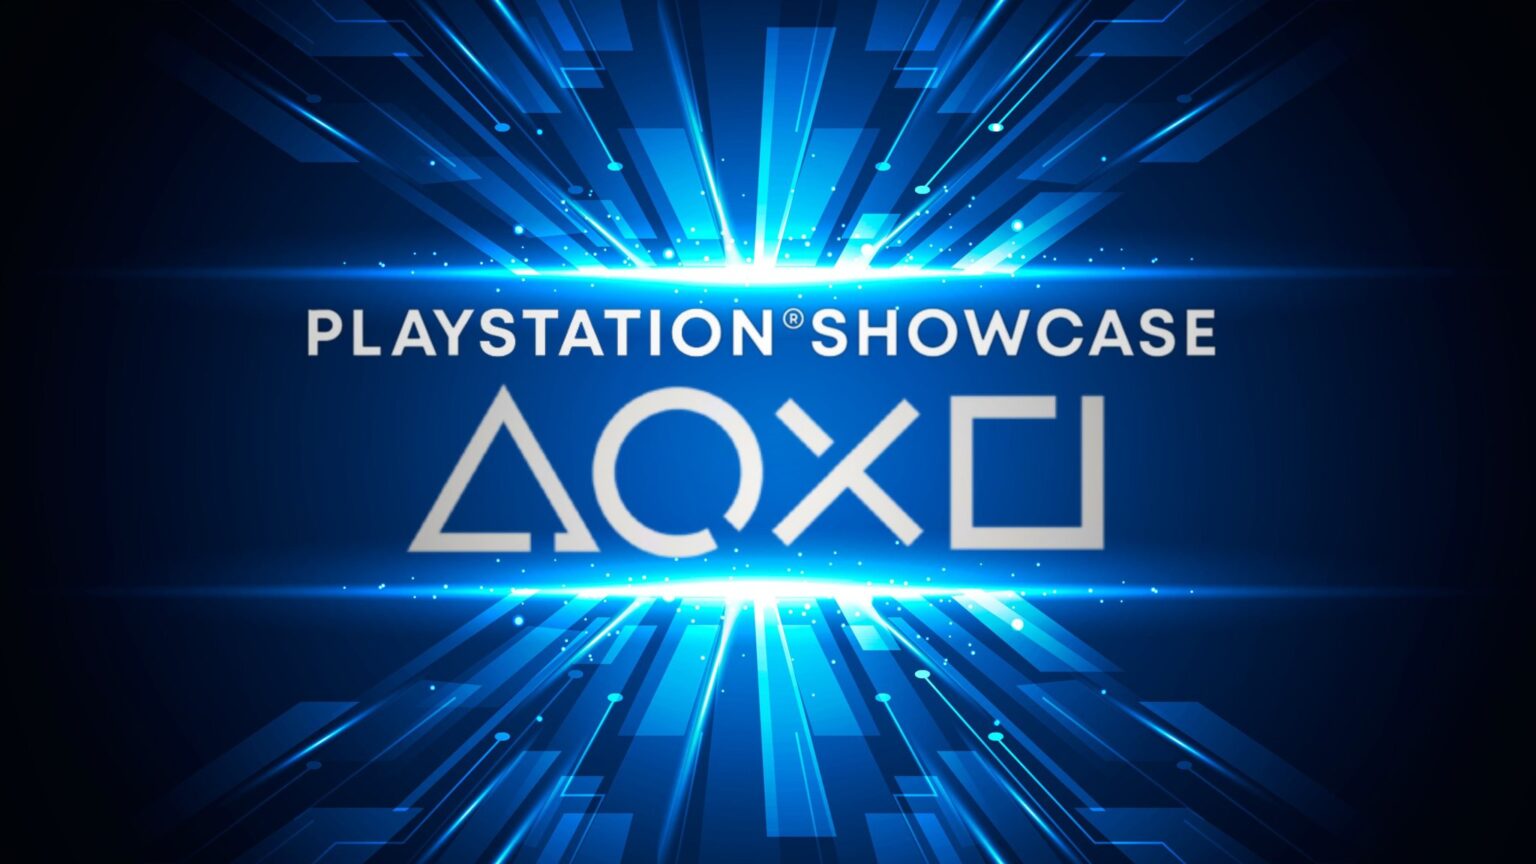 GameSpot - A PlayStation Showcase event is reportedly coming the week of  May 25!